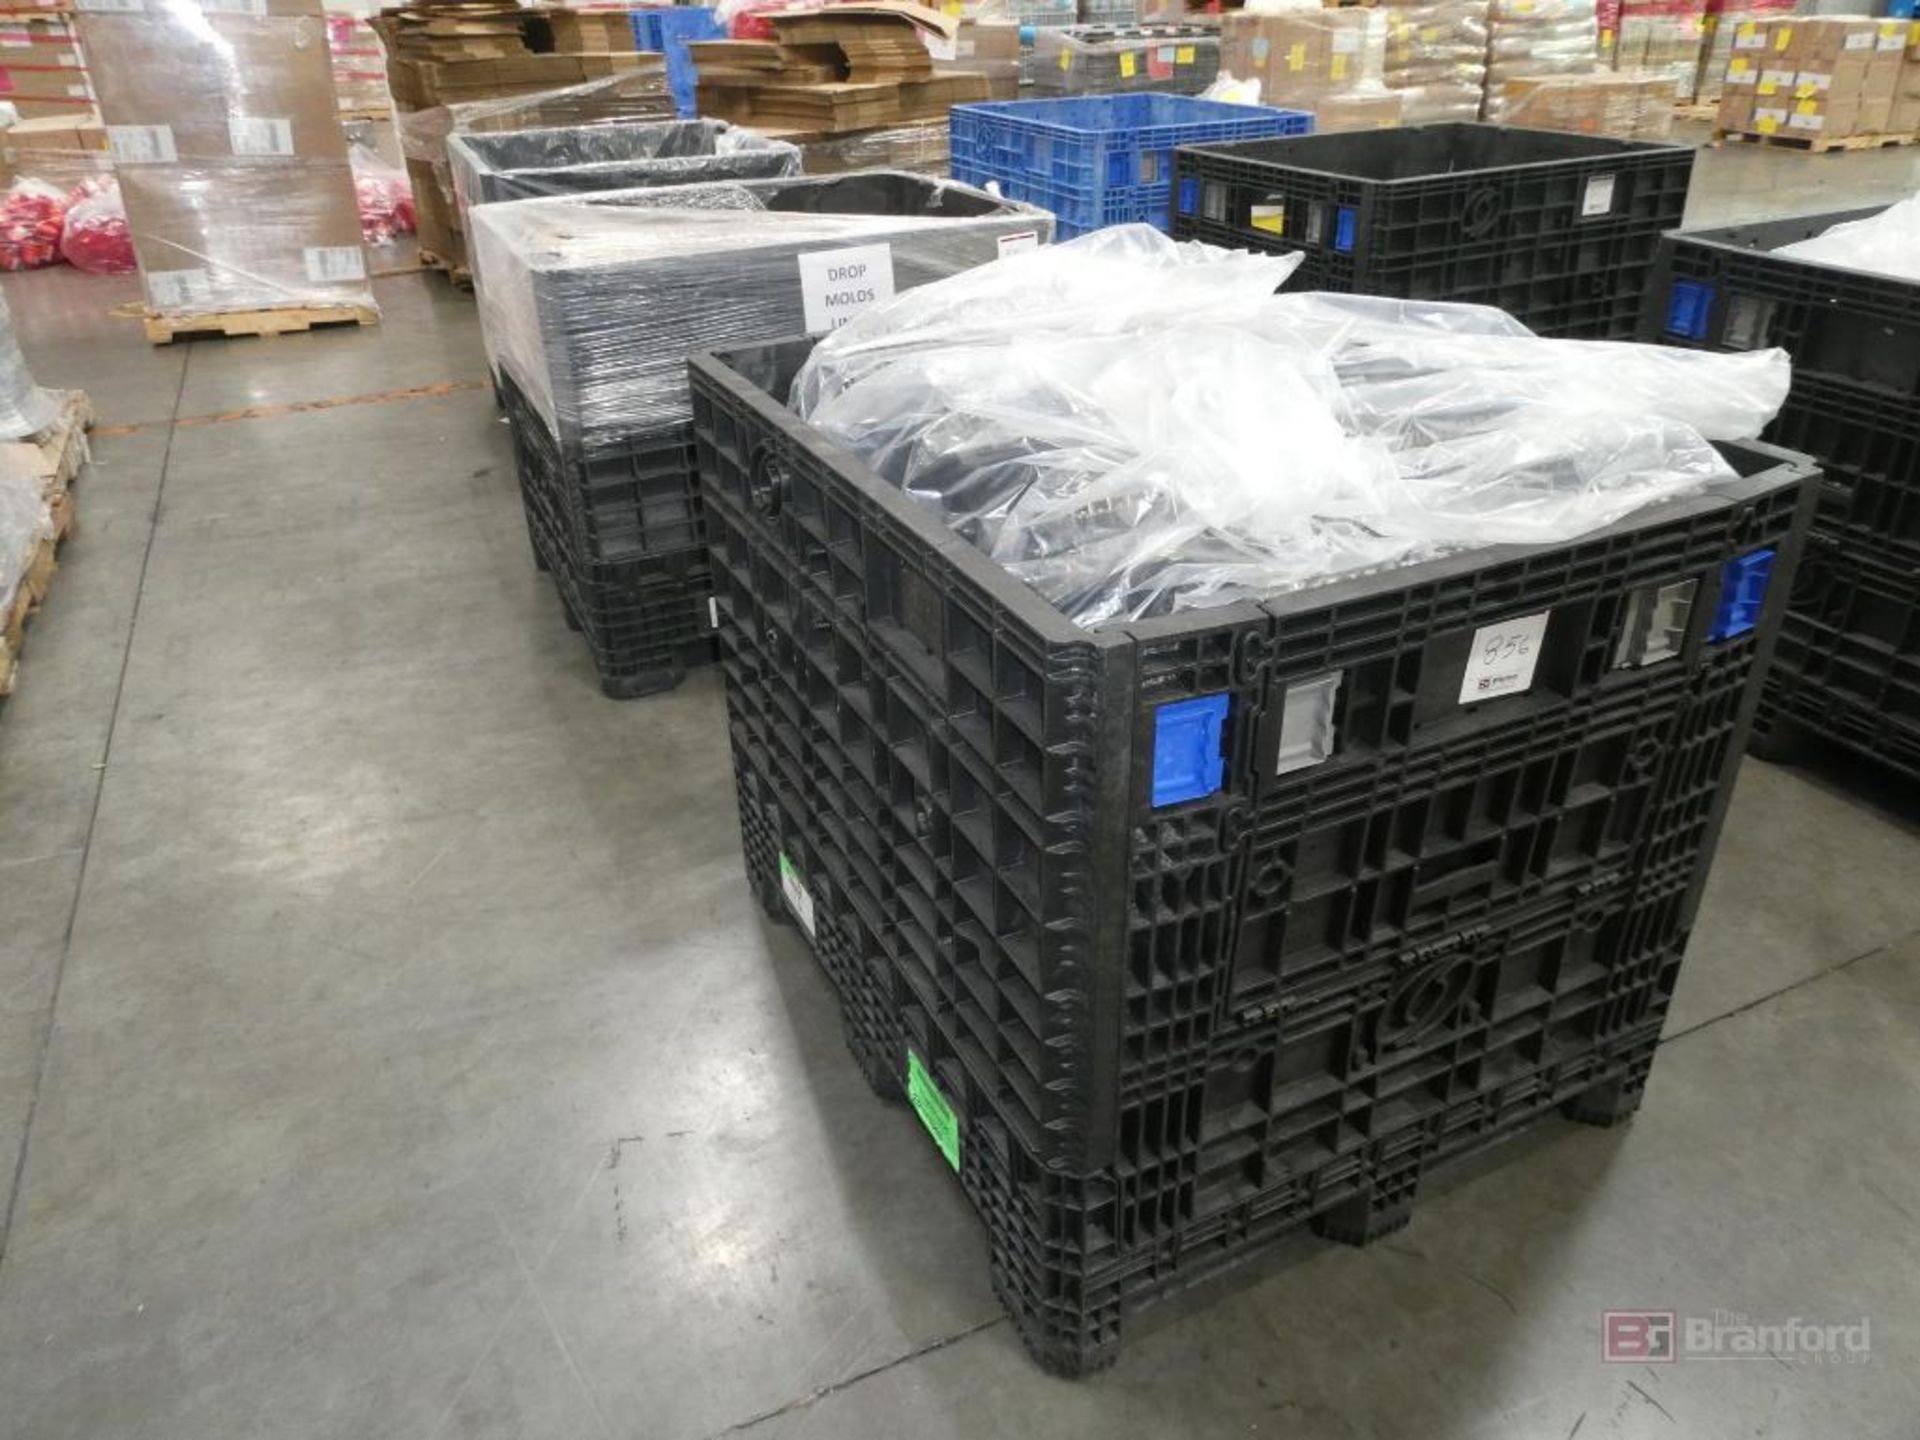 (3) Uline Model H1736BLU, Poly Folding Crates w/ Contents